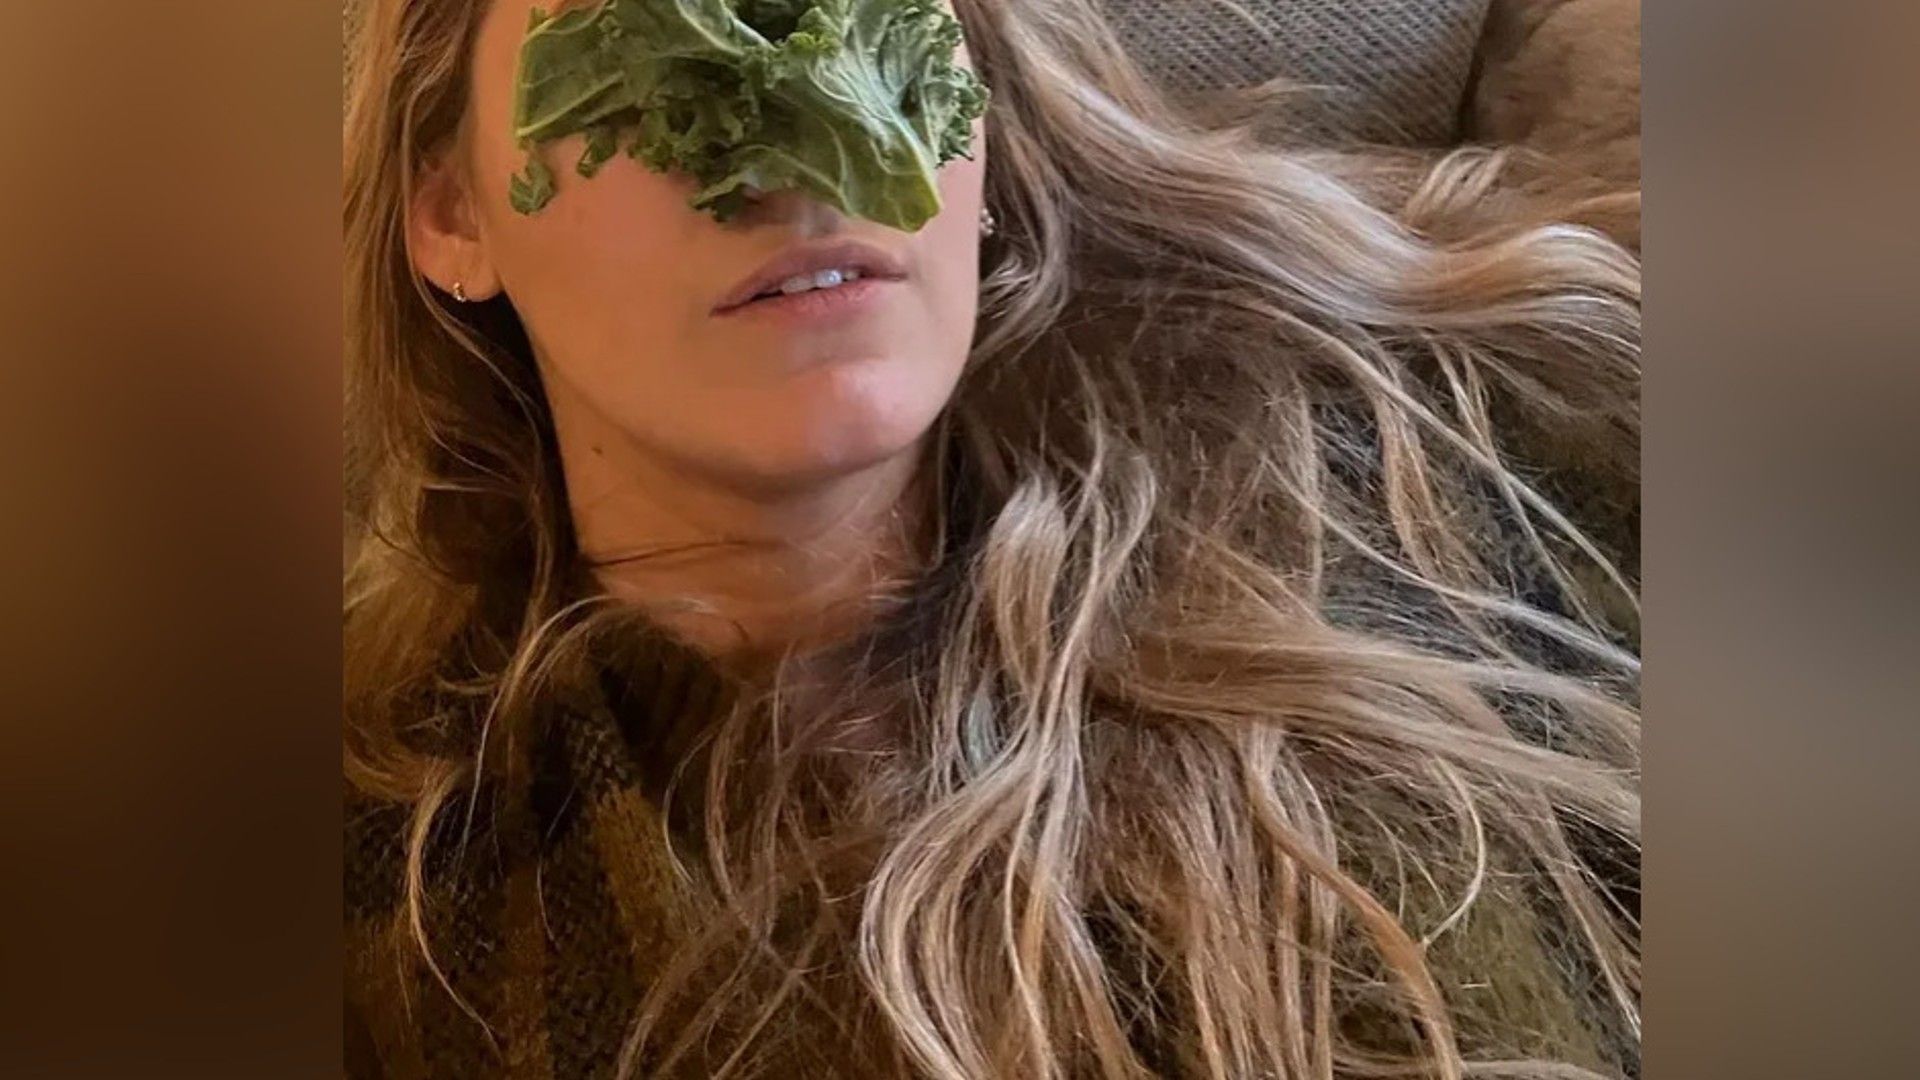 Blake Lively with salad on the face